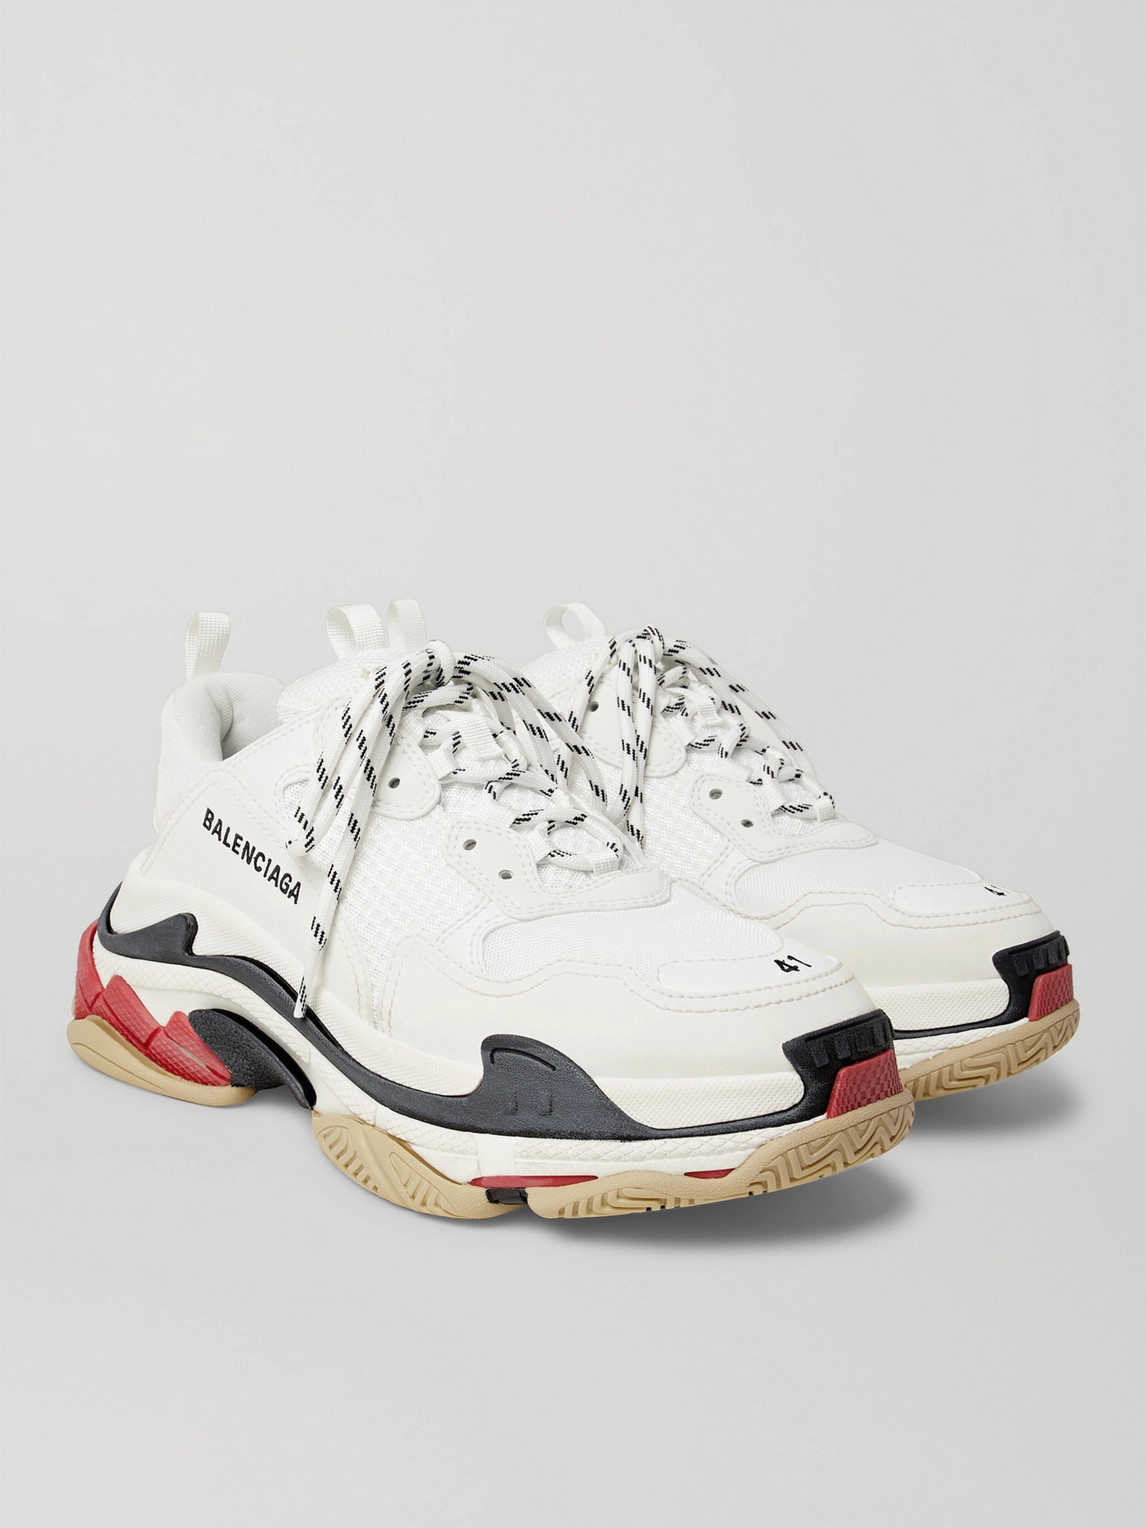 BALENCIAGA TRIPLE S MESH AND FAUX LEATHER SNEAKERS